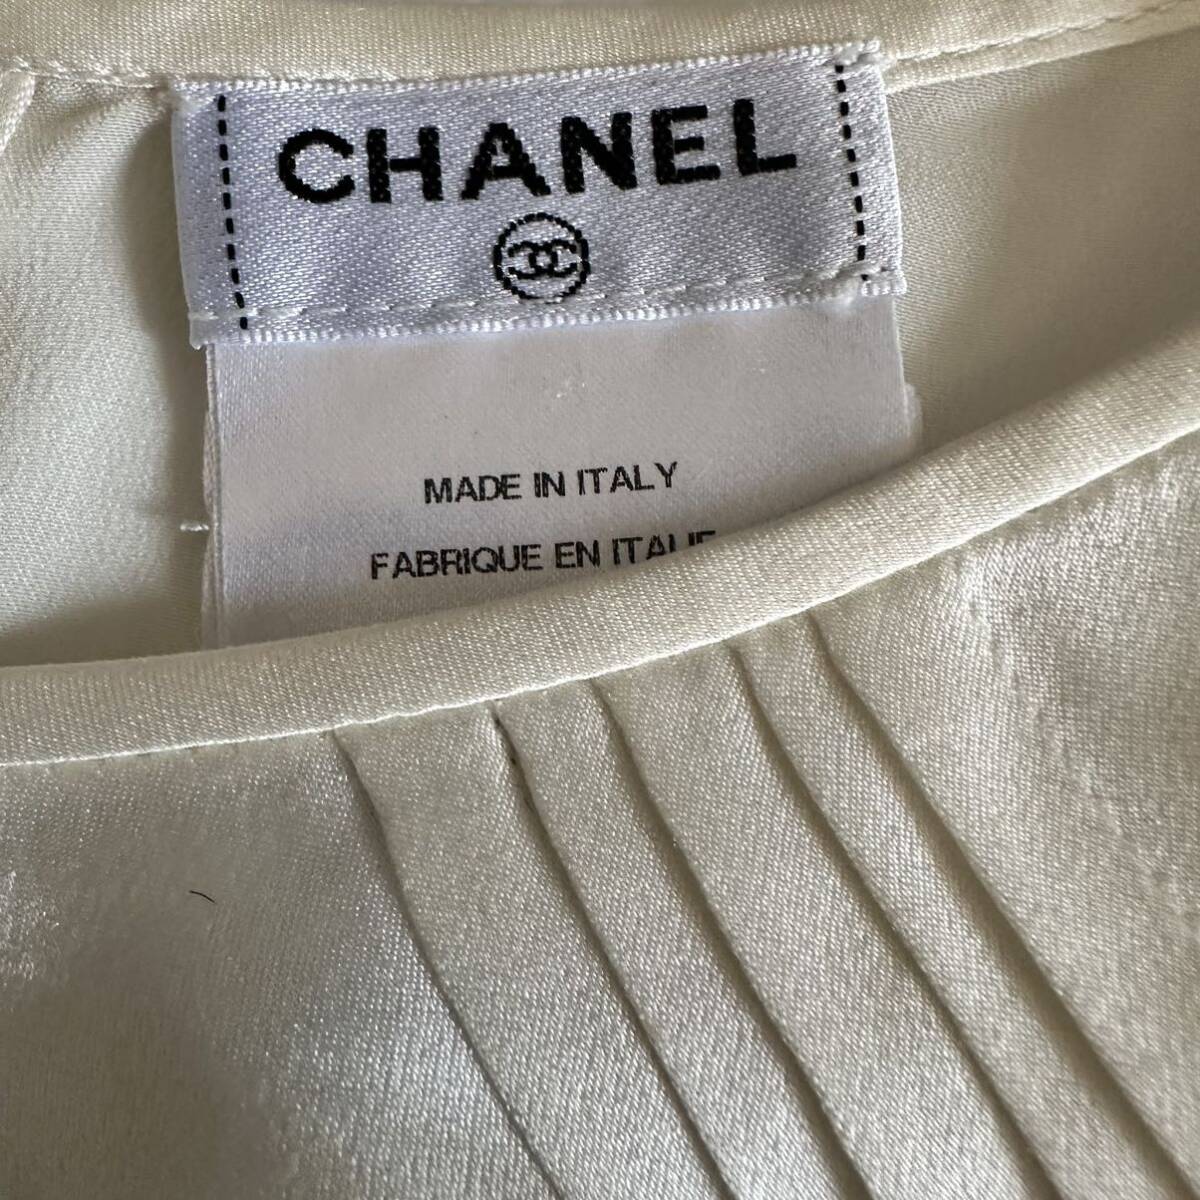 CHANEL Chanel no sleeve blouse cut and sewn tank top ivory silk 100%